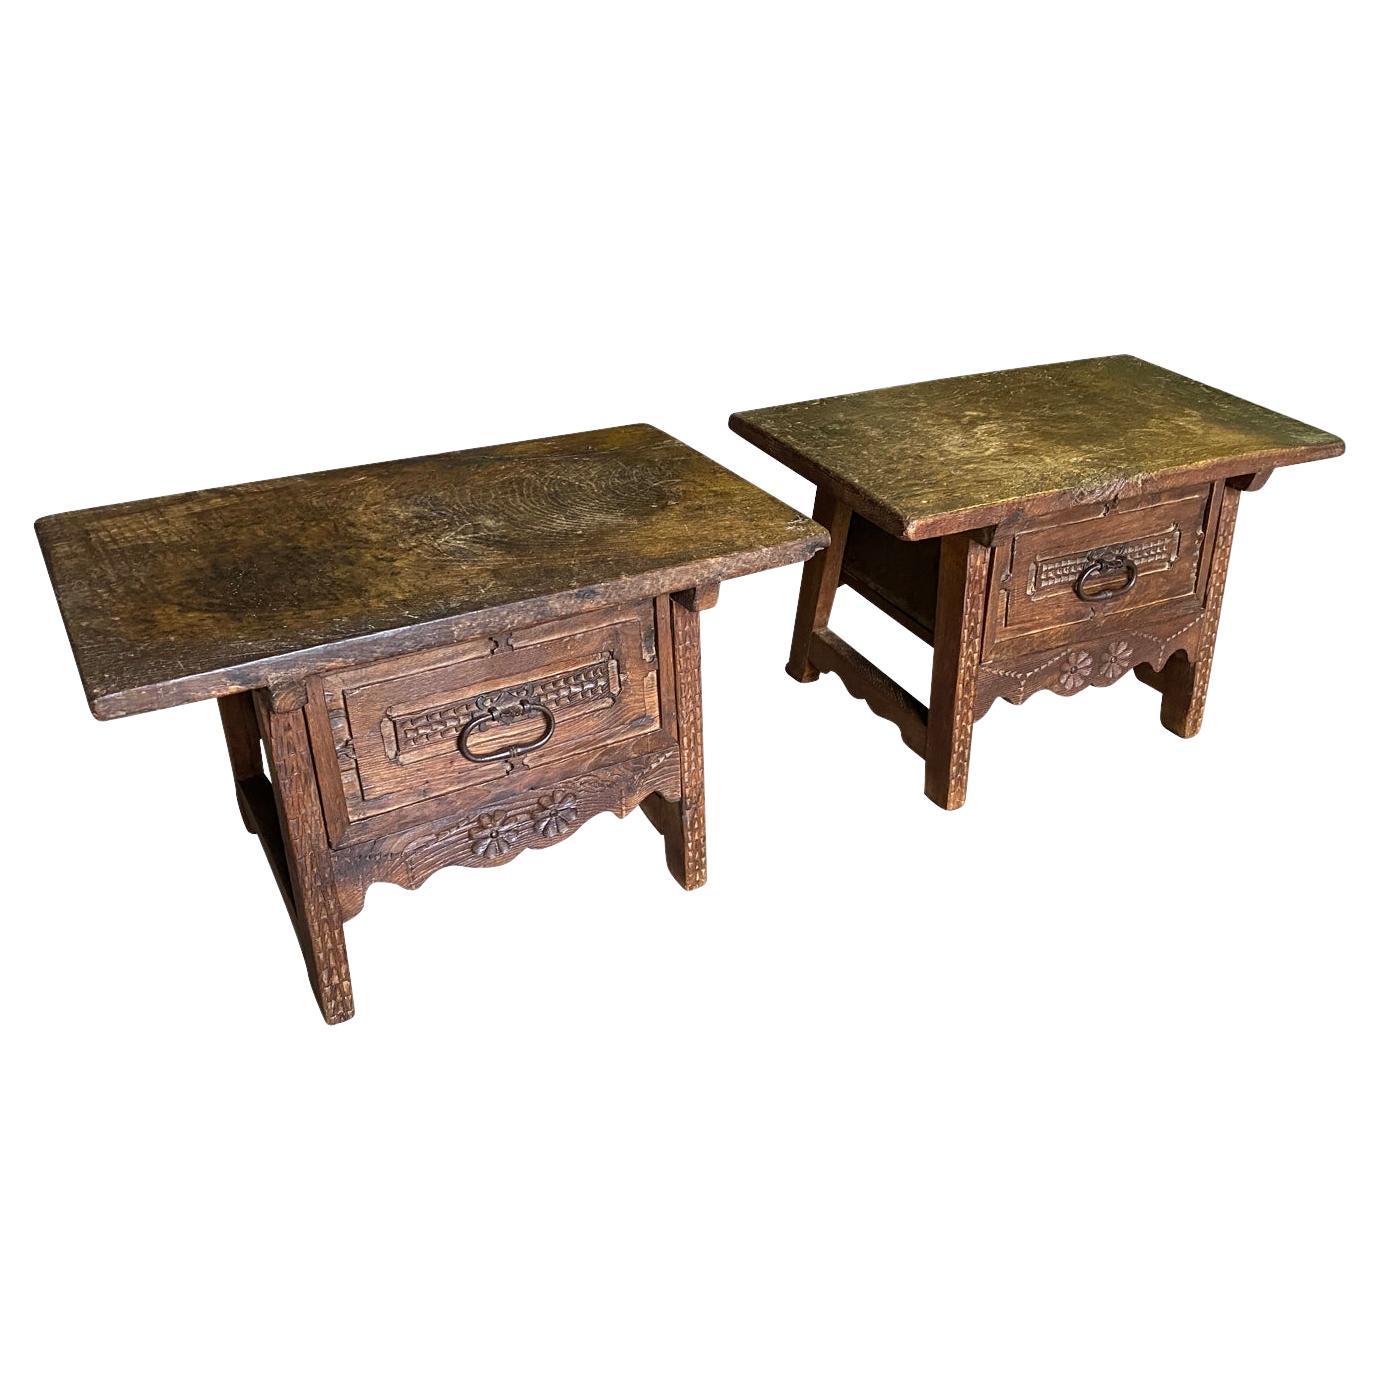 An outstanding pair of 18th century Side Tables from the Catalan region of Spain.  Beautifully constructed from chestnut and meleze (a very hard pine) with solid board tops, single drawers, charming carving detail and slightly splayed legs.  Super